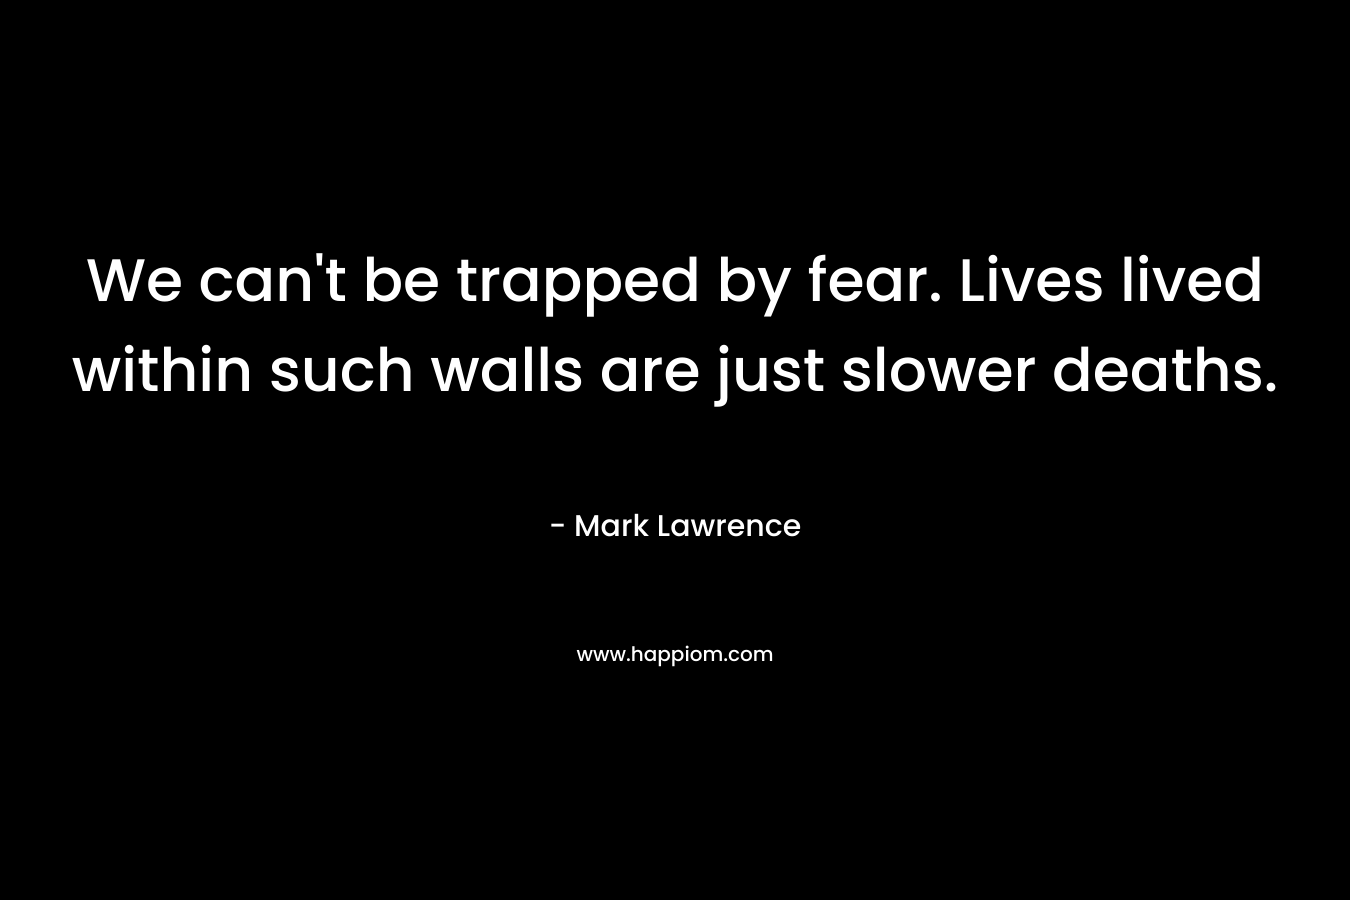 We can't be trapped by fear. Lives lived within such walls are just slower deaths.